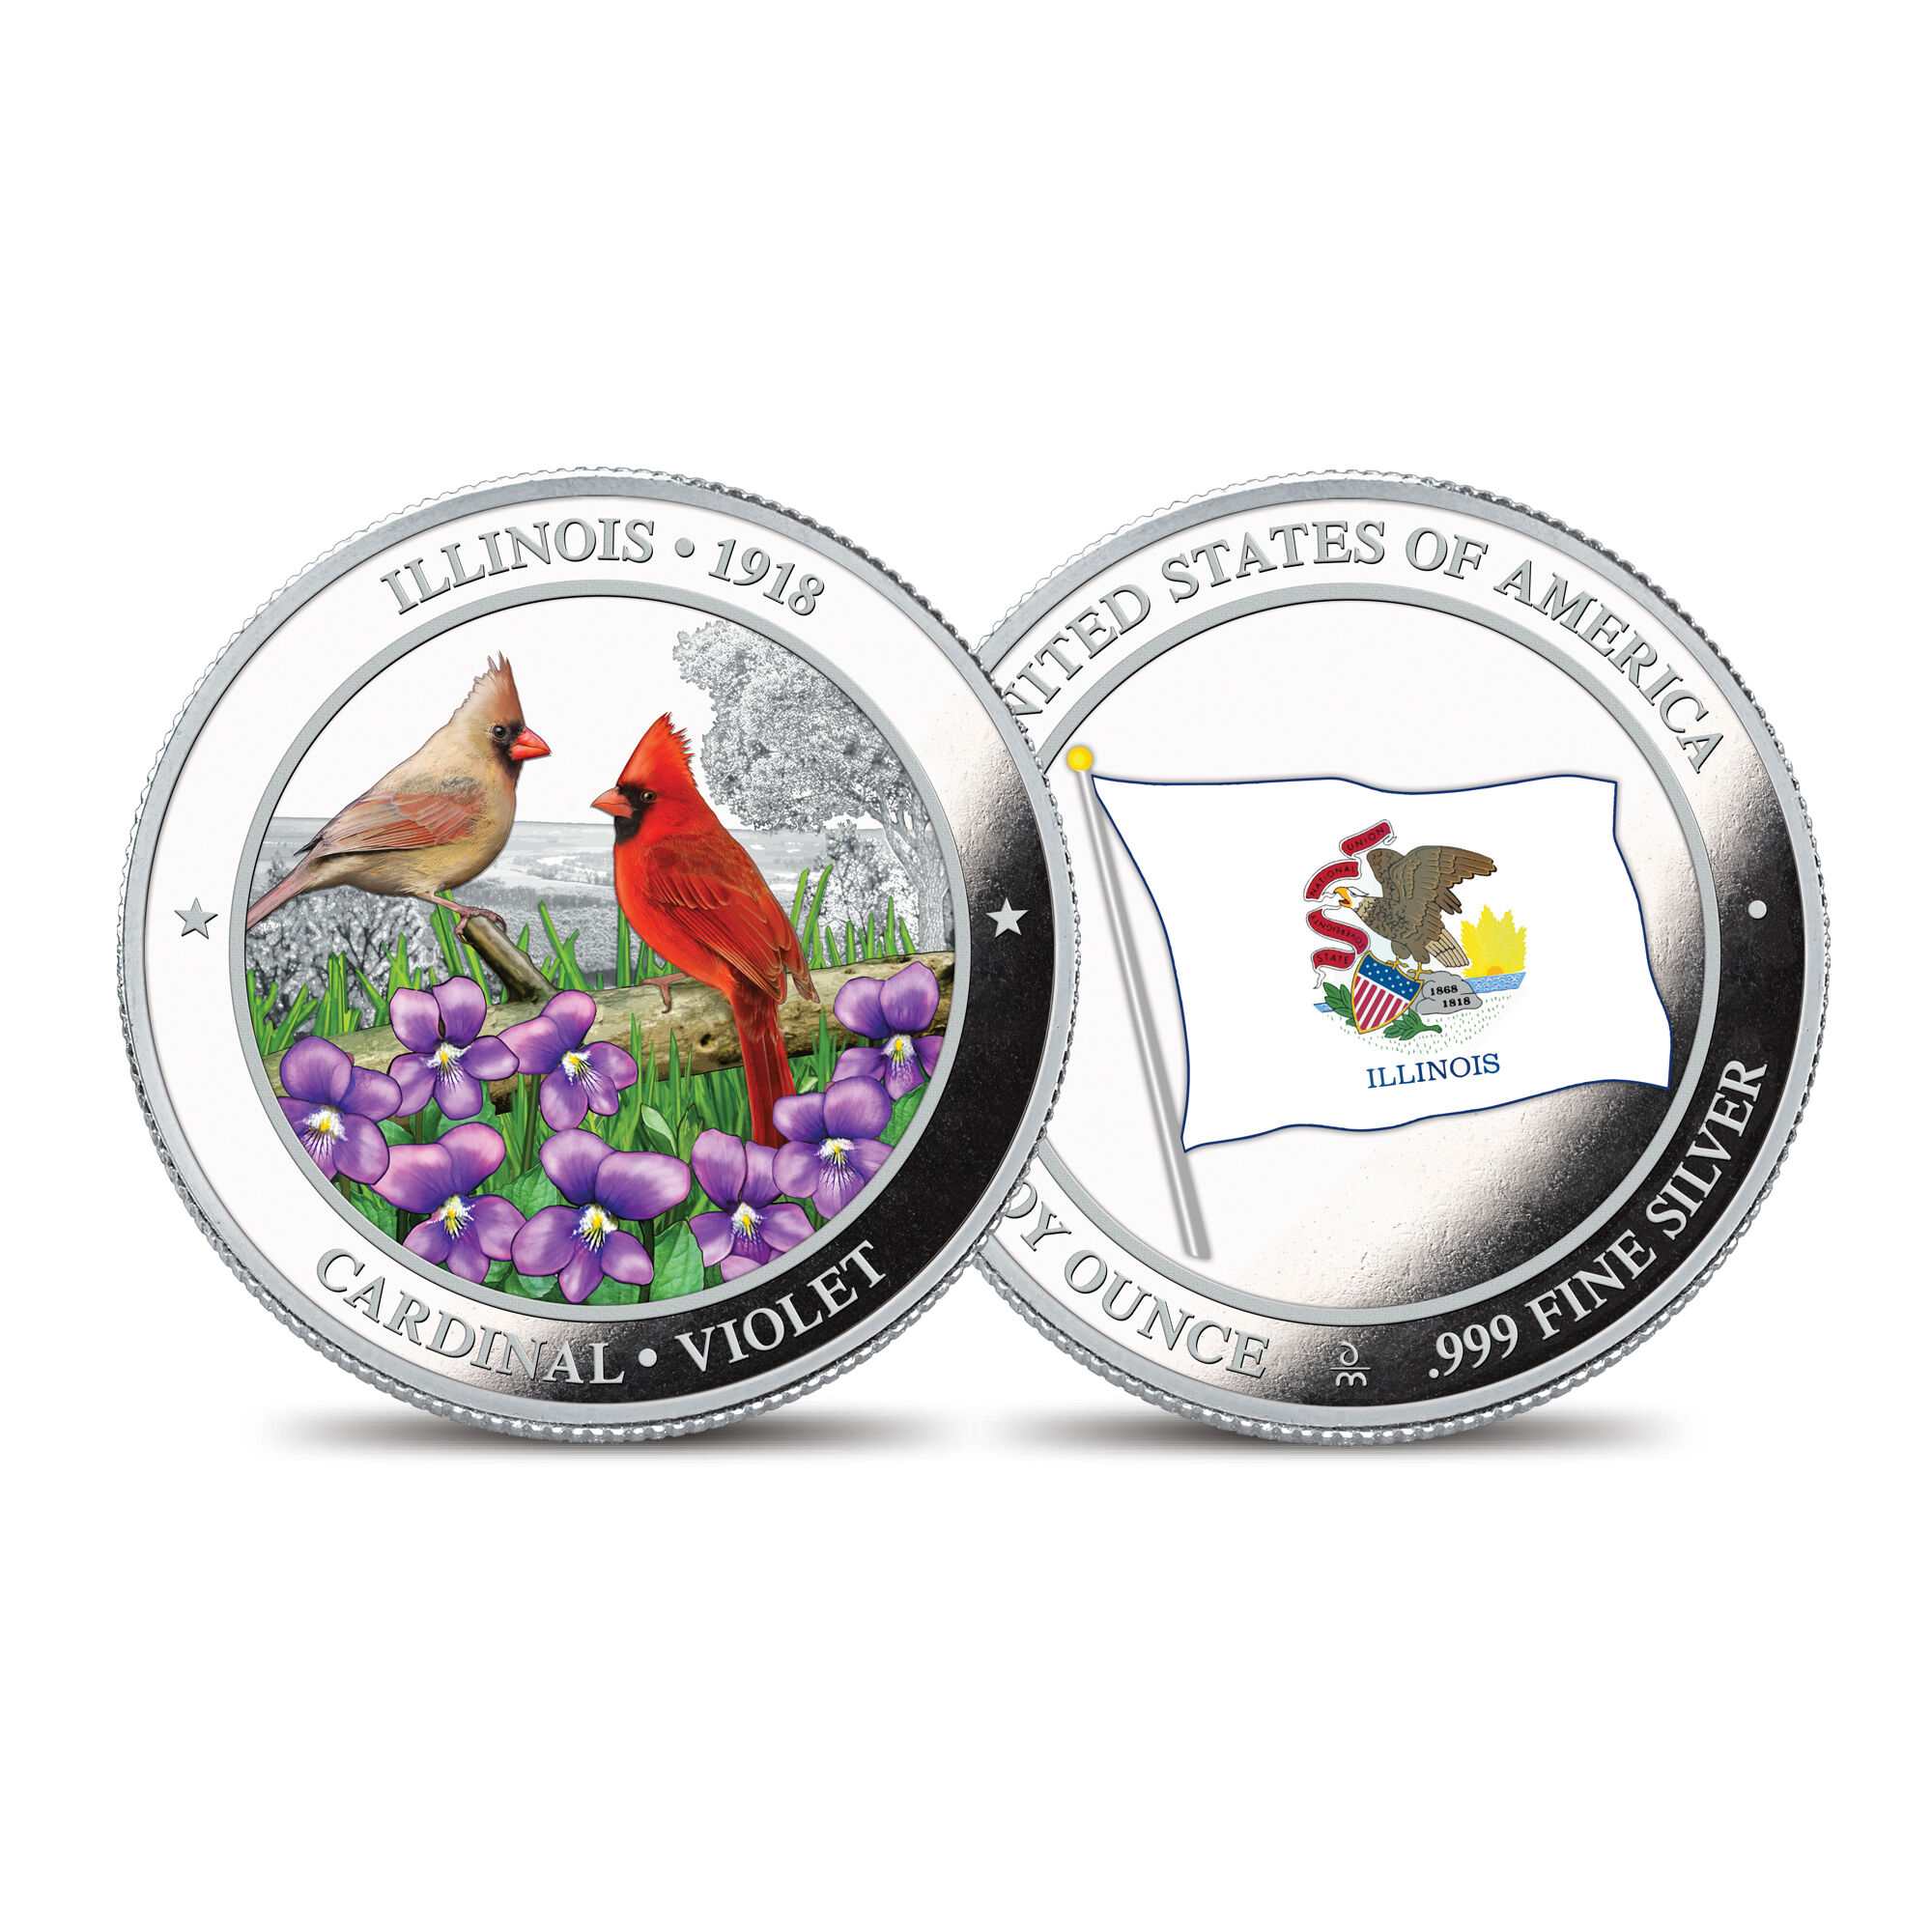 The State Bird and Flower Silver Commemoratives 2167 0088 a commemorativeIL